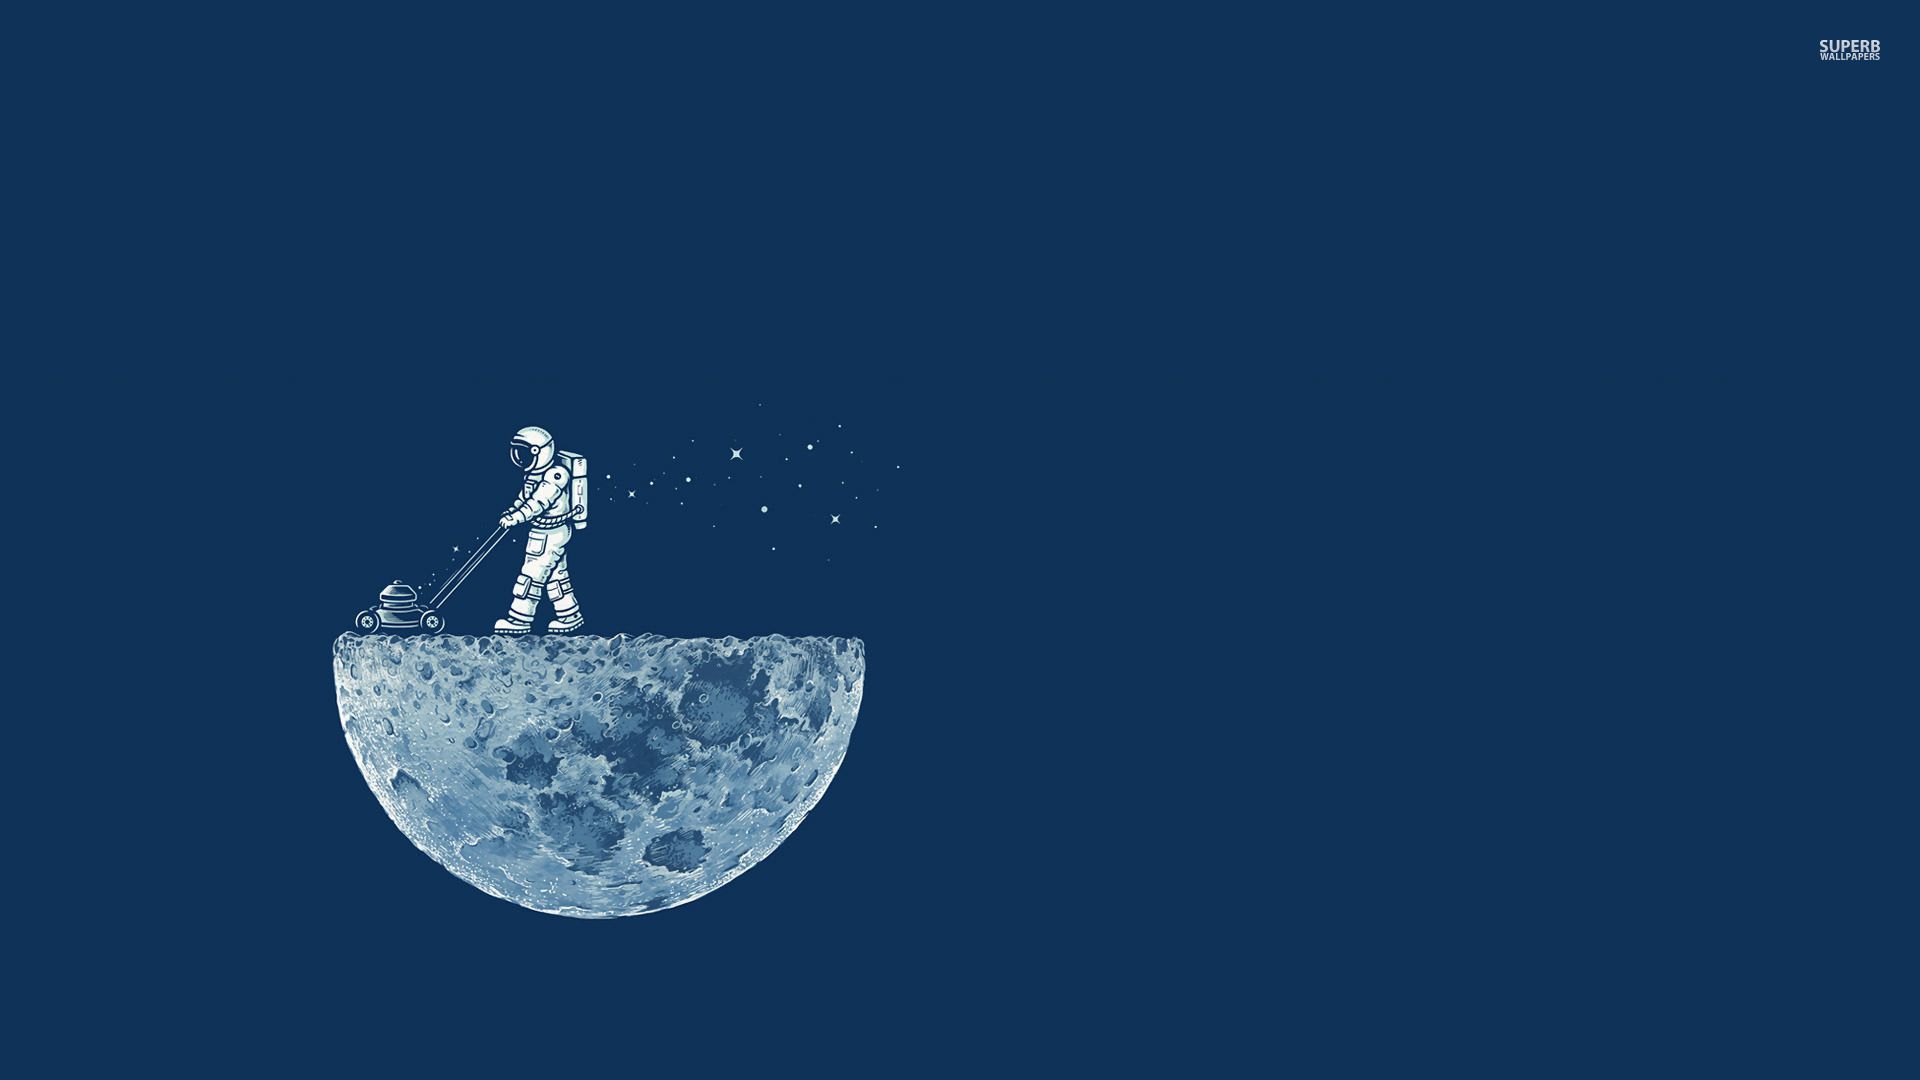 Astronaut mowing the moon wallpaper - Funny wallpapers - #31038